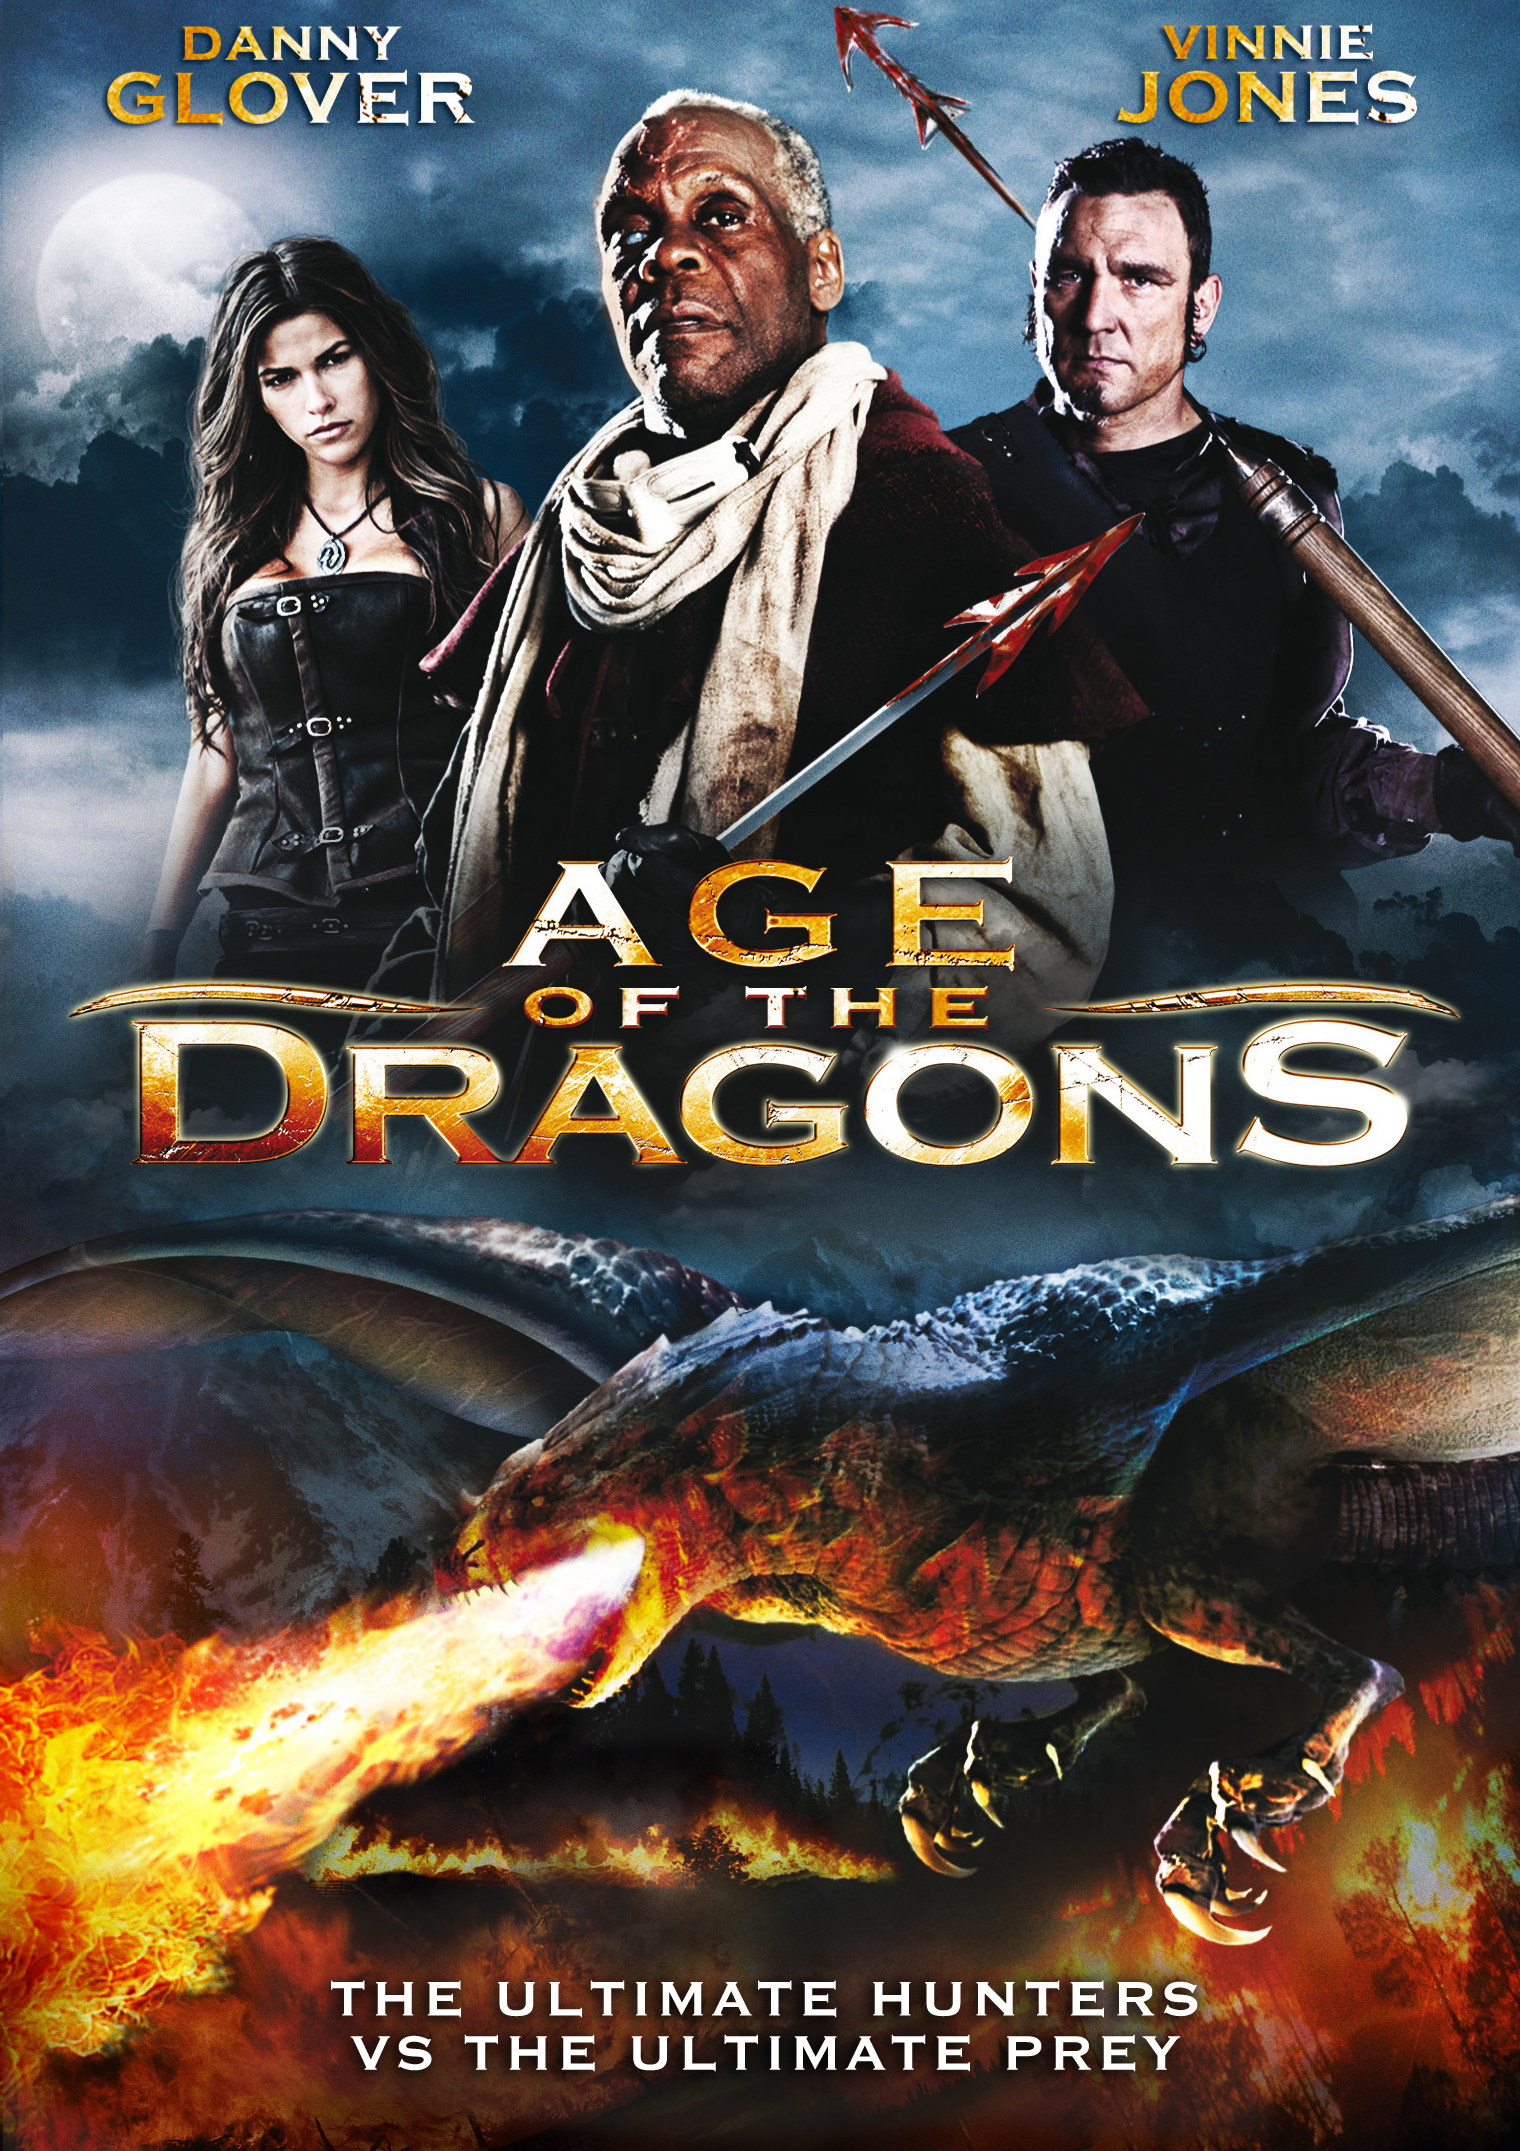 http://goodfilmguide.co.uk/wp-content/uploads/2011/03/age-of-the-dragons-poster.jpg